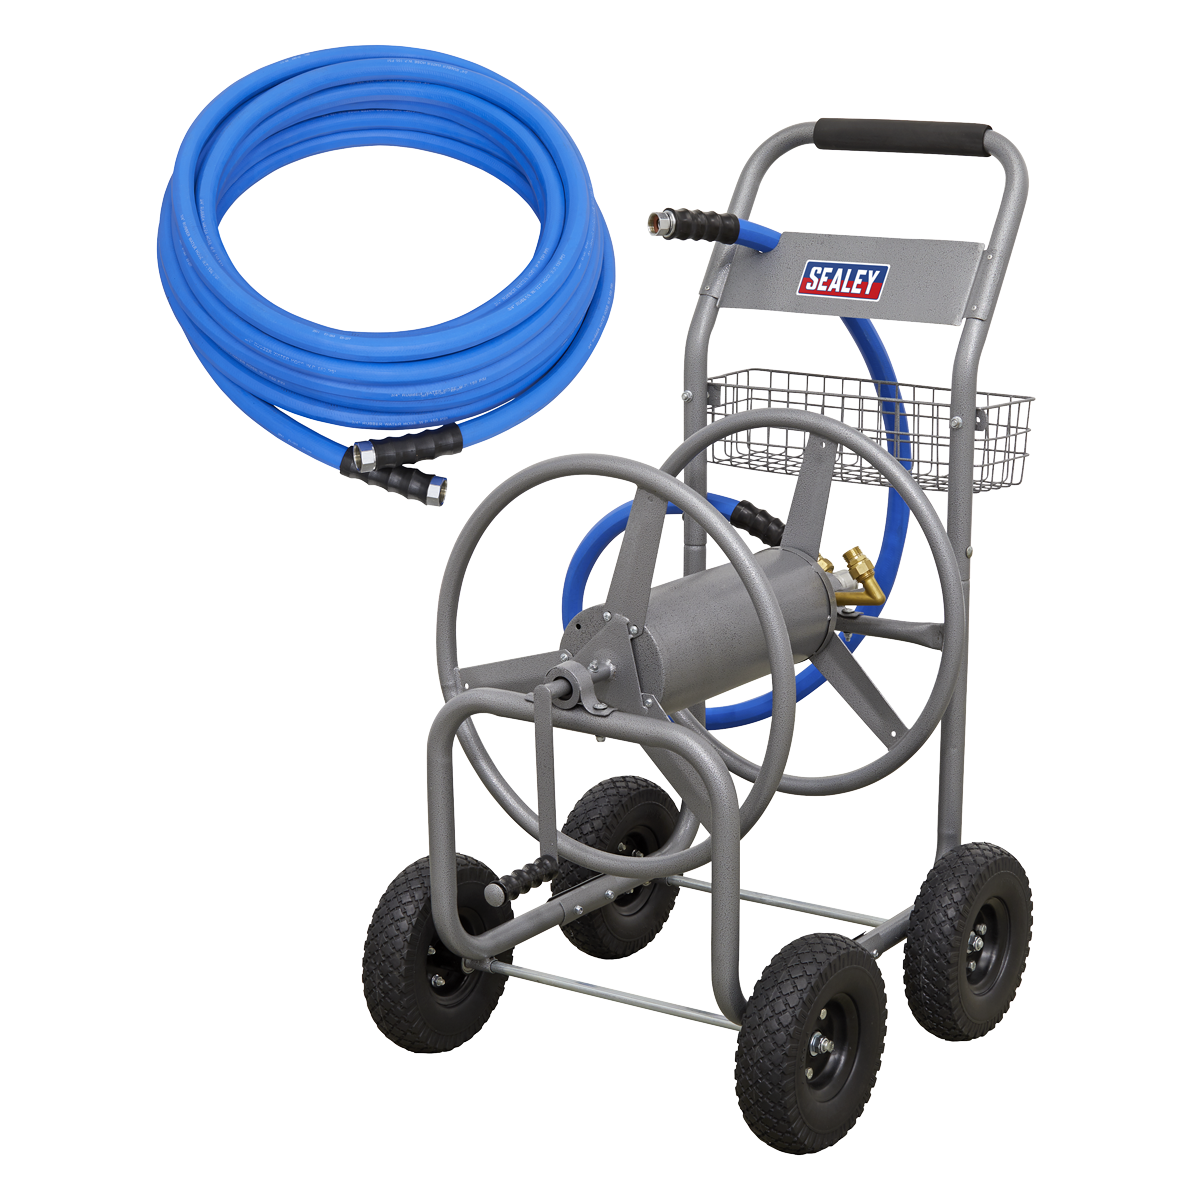 Heavy-Duty Hose Reel Cart with 15m Heavy-Duty Ø19mm Hot & Cold Rubber Water Hose - HRKIT15 - Farming Parts